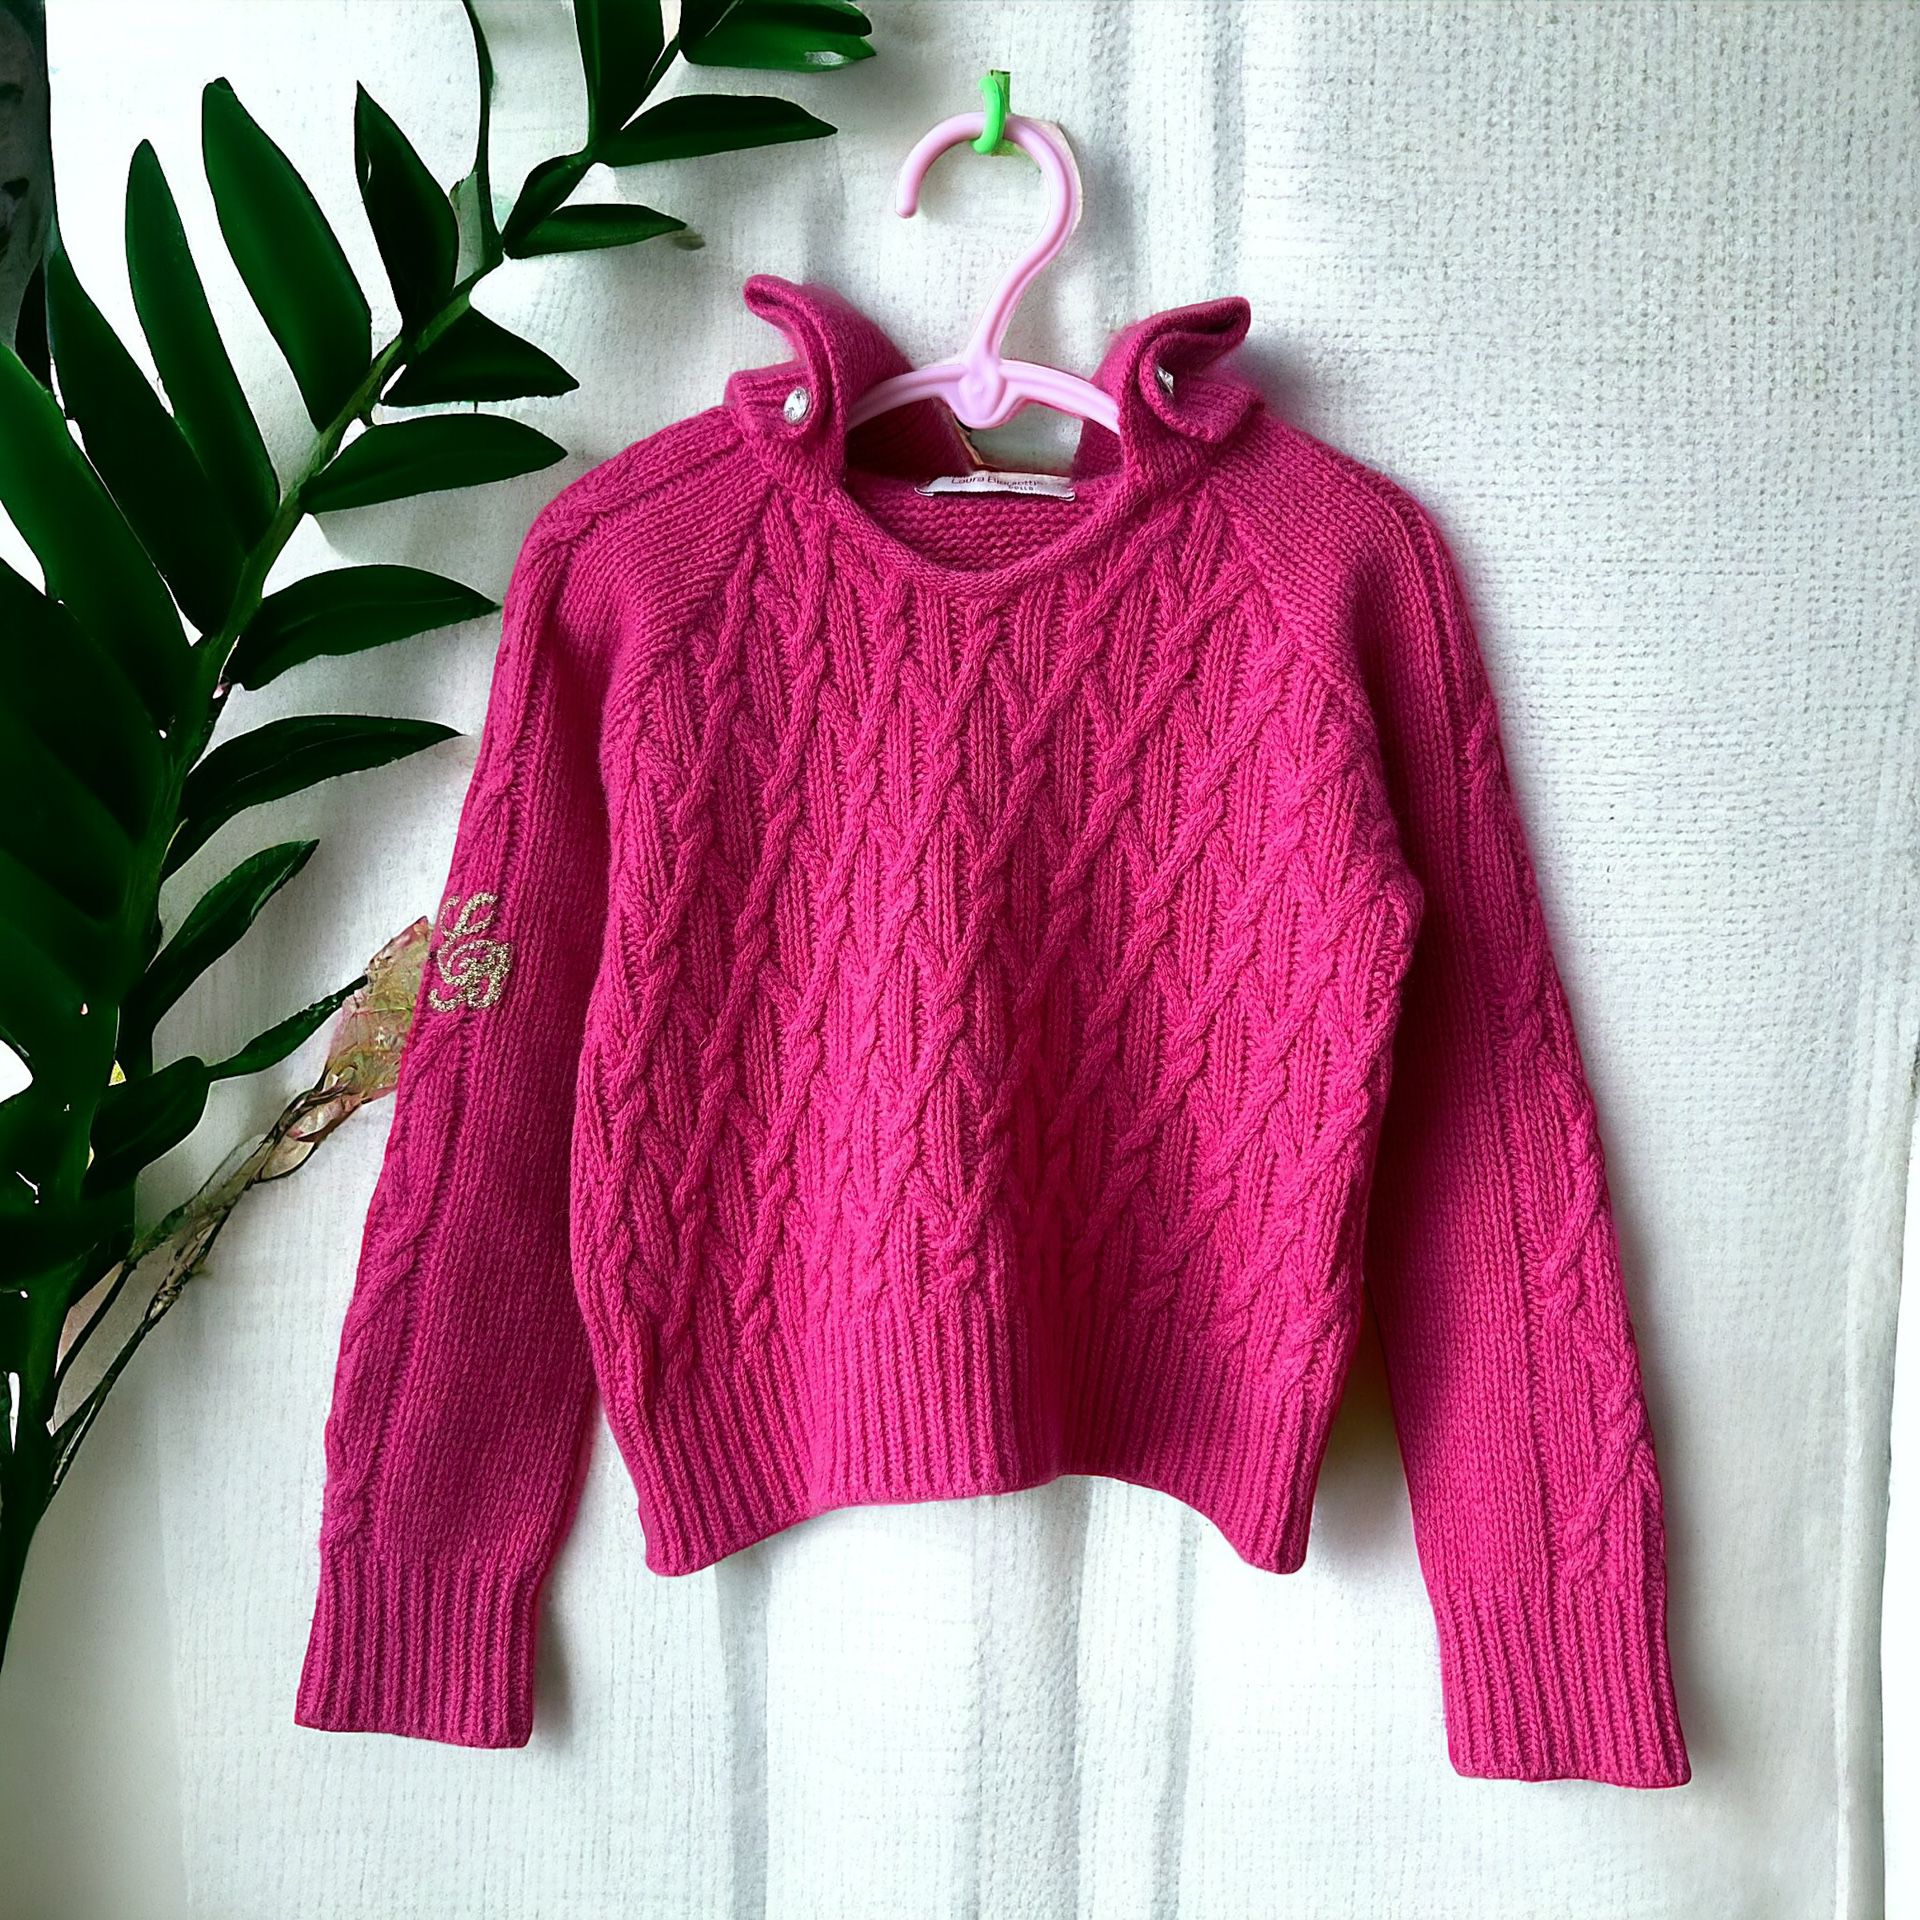 Laura Biagiotti Wool/Cashmere Cable Knit Sweater, Girl Size 3-4T/ 104, Pink